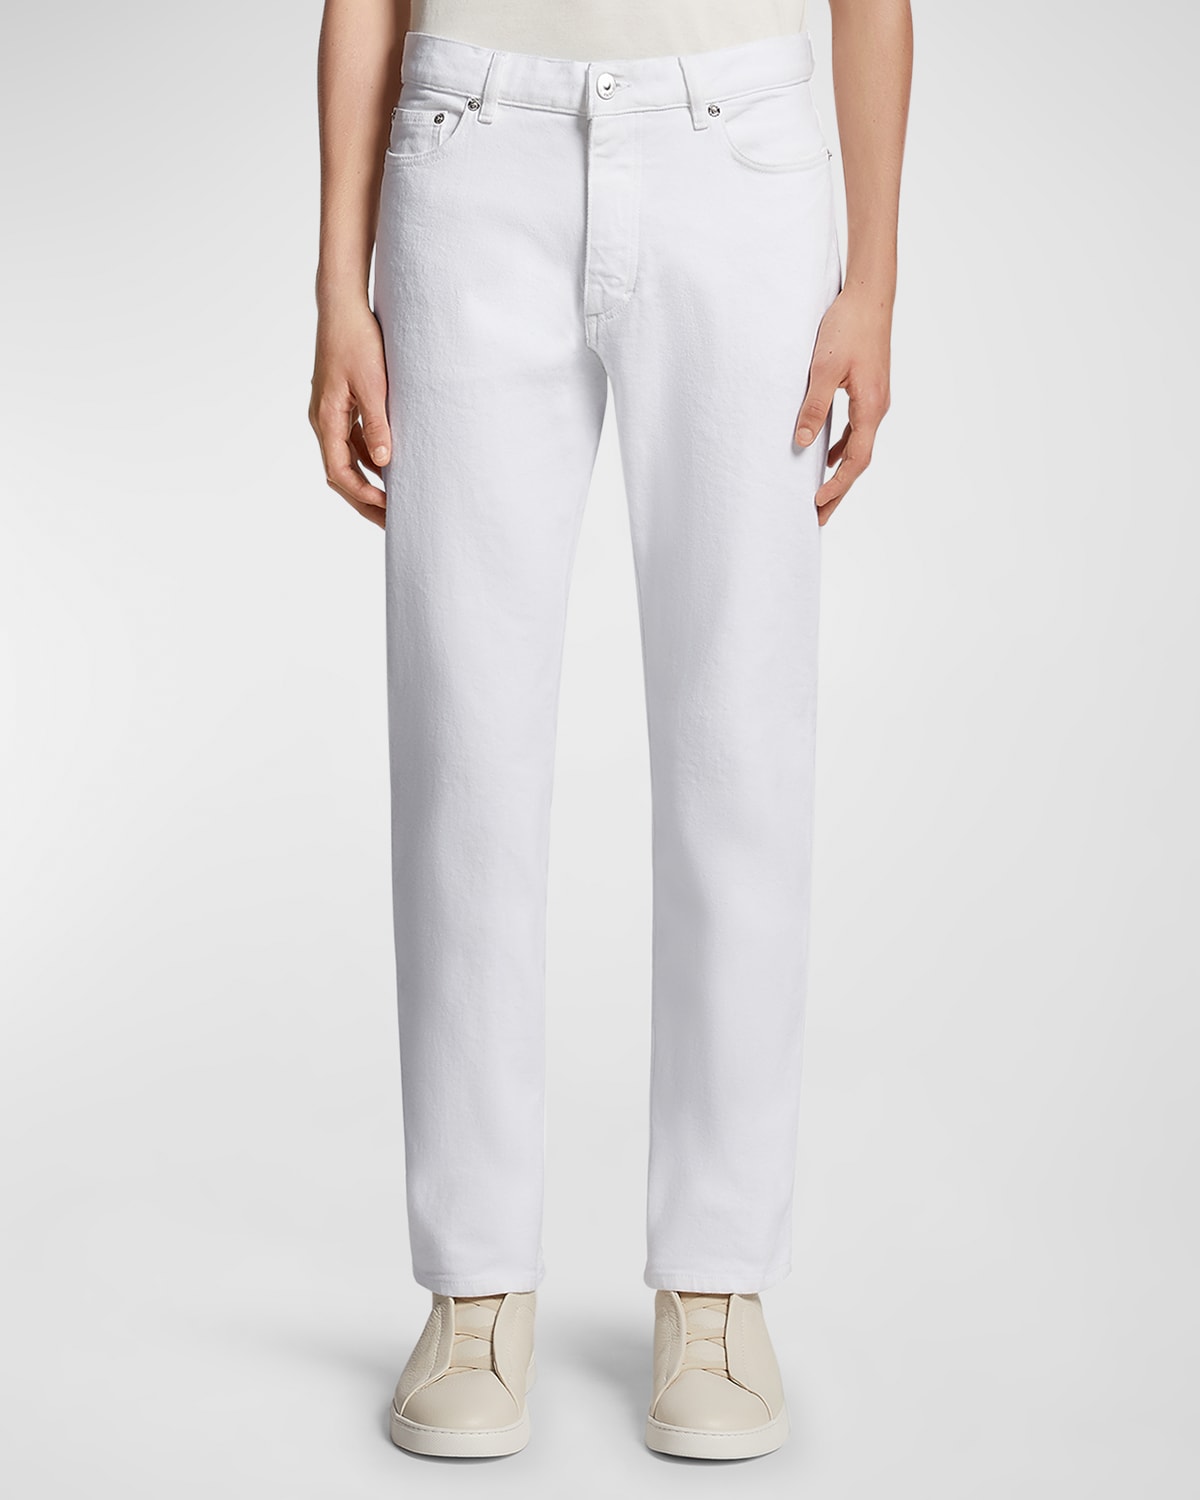 Zegna Classic Comfort Five-pocket Jeans In White